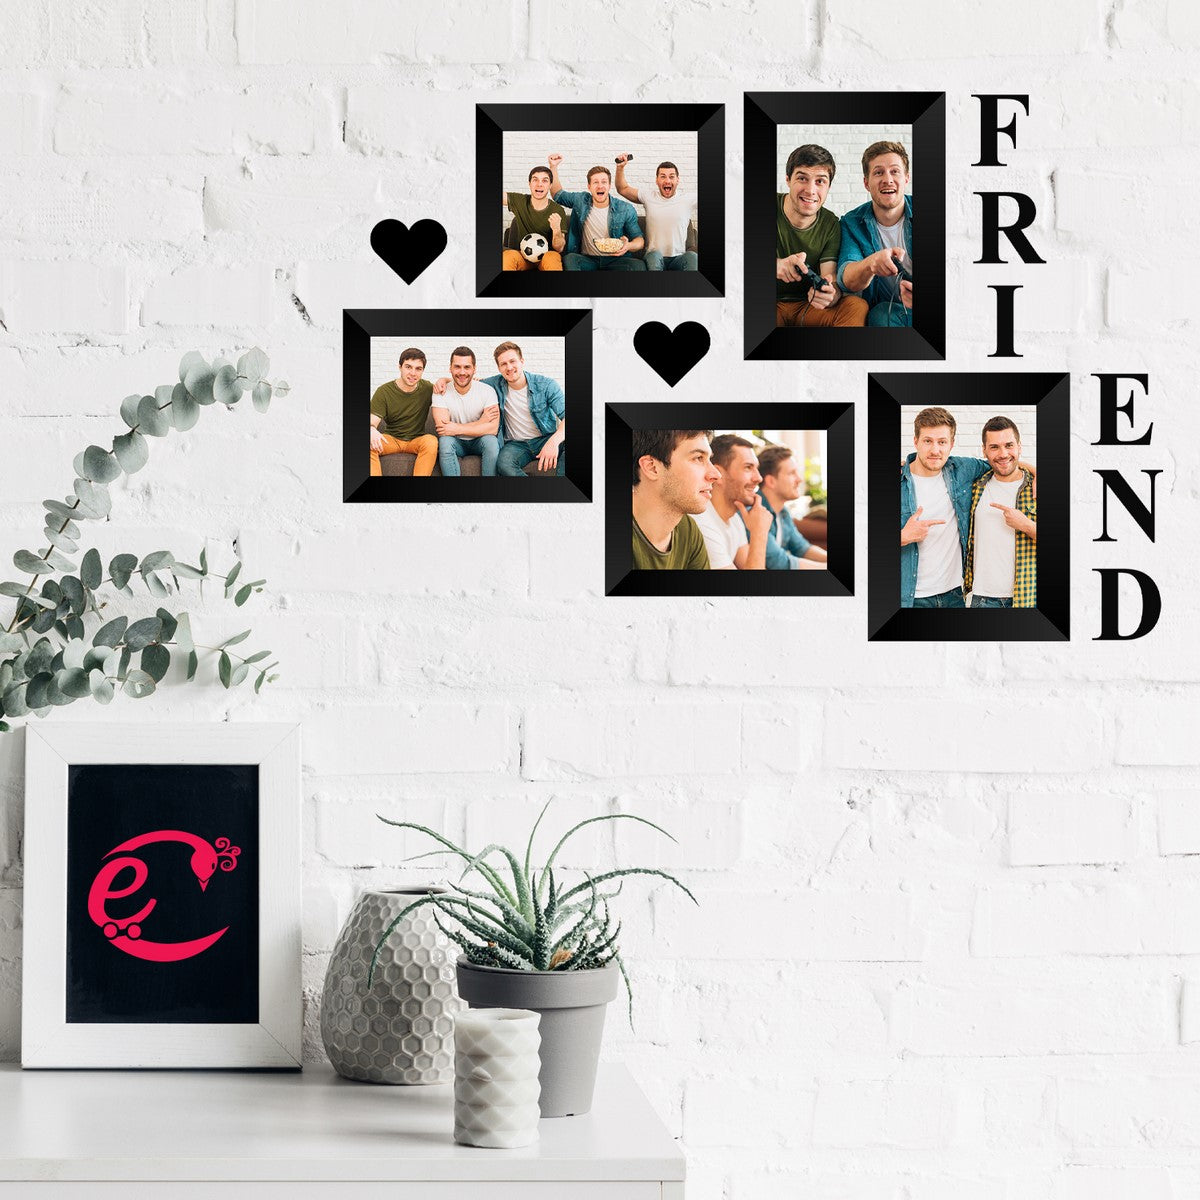 Memory Wall Collage Photo Frame - Set of 5 Photo Frames for 3 Photos of 4"x6", 2 Photos of 5"x7", 1 Piece of FRIENDS, 2 Pieces of HEARTS 1